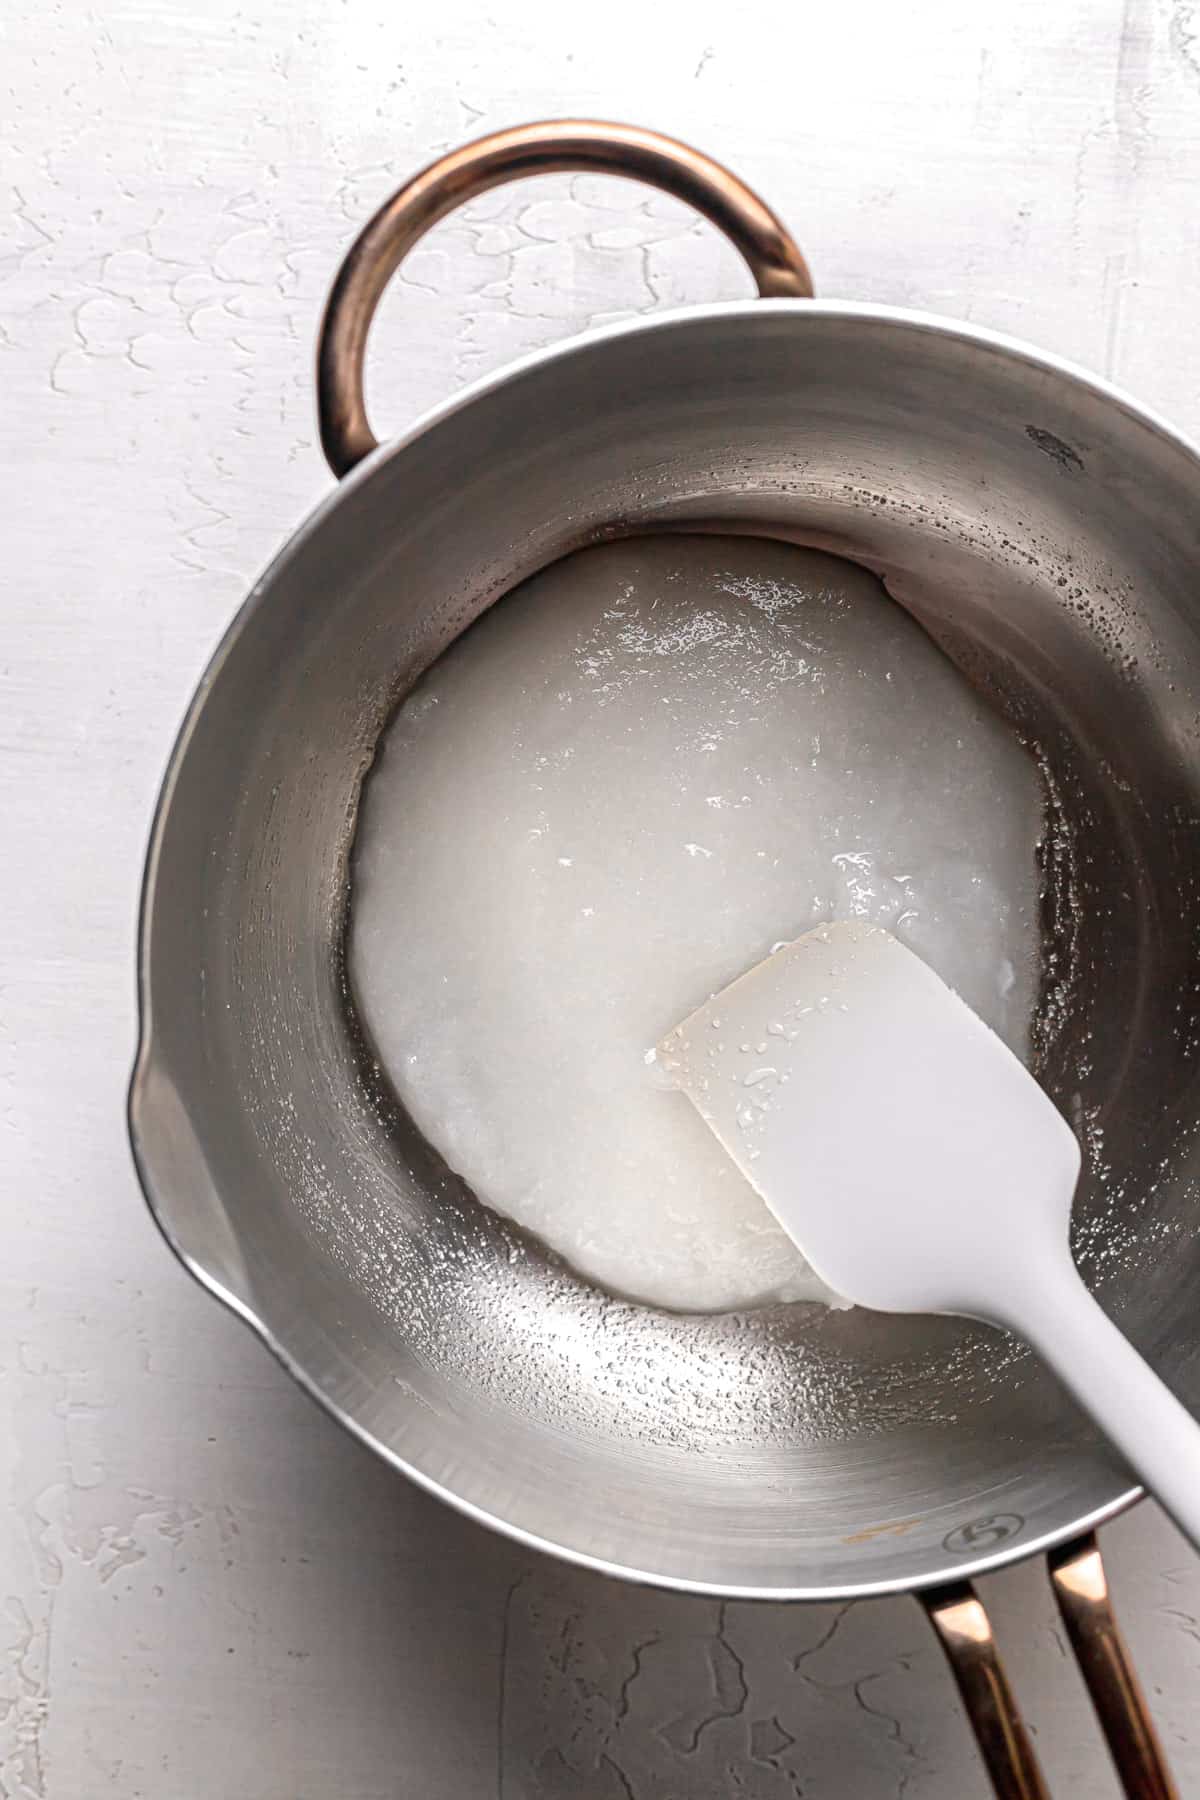 water fully mixed into into sugar mixture in saucepan.